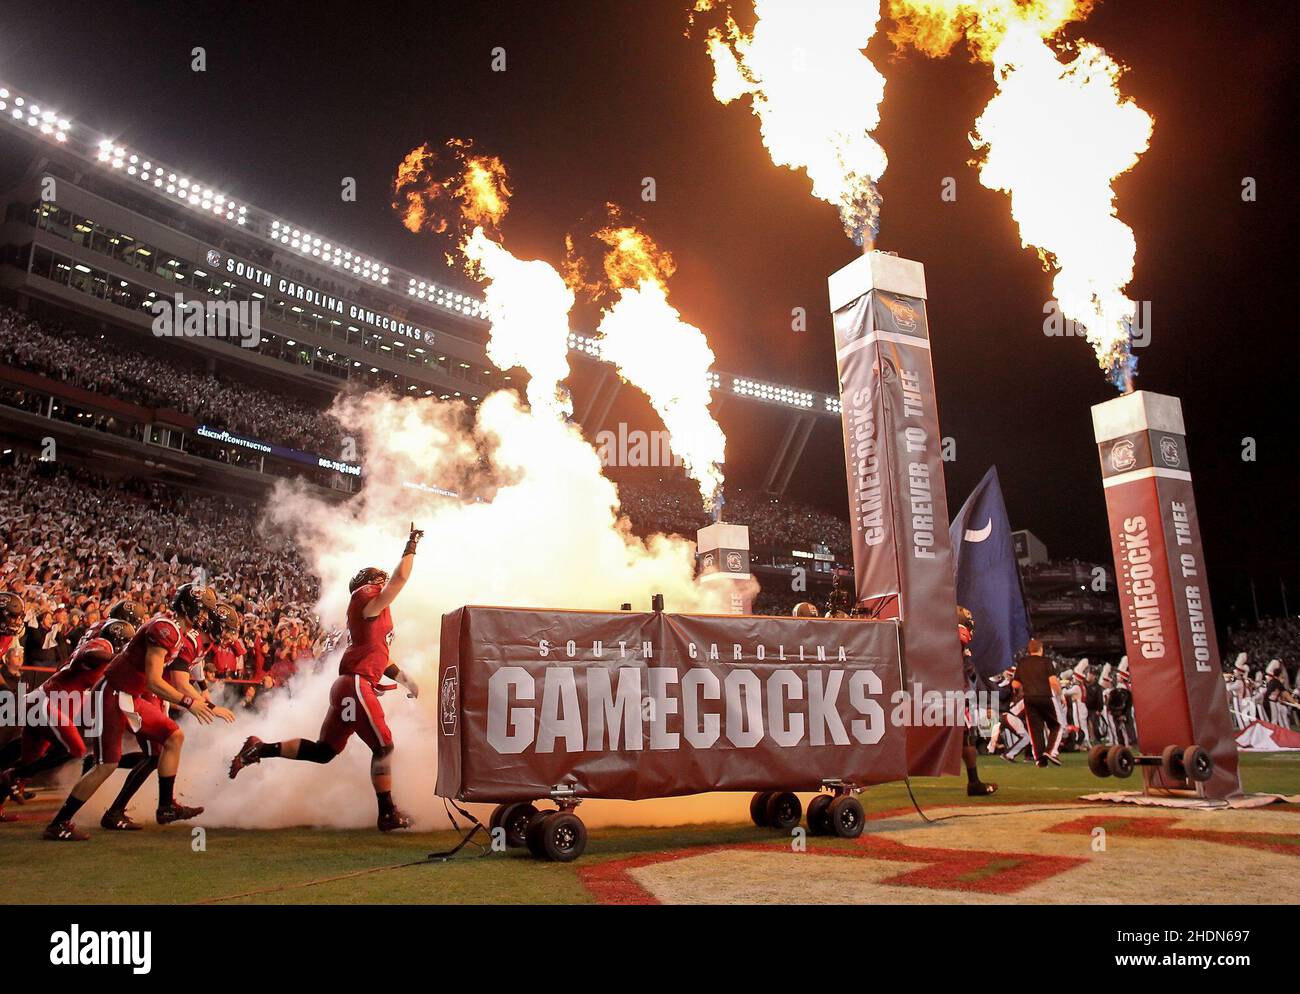 The South Carolina Gamecocks team enters Williams-Brice Stadium through flames to the playing of  2001 before the start of their SEC college football game in Columbia, S.C. (Travis Bell/SIDELINE CAROLINA) Stock Photo